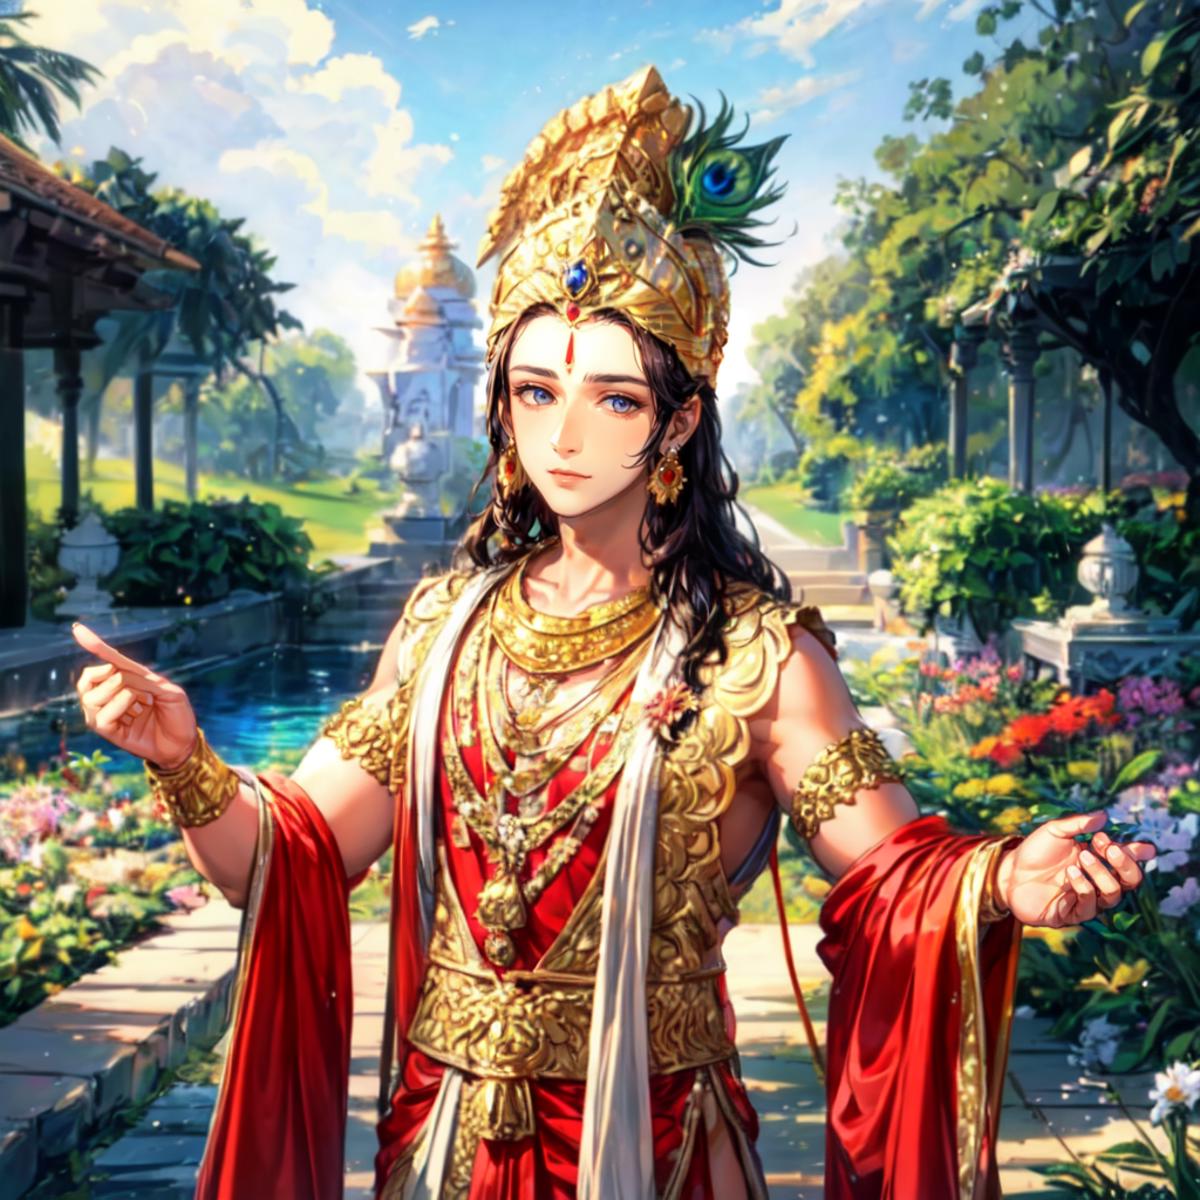 Anime Krishna image by quoteforframe